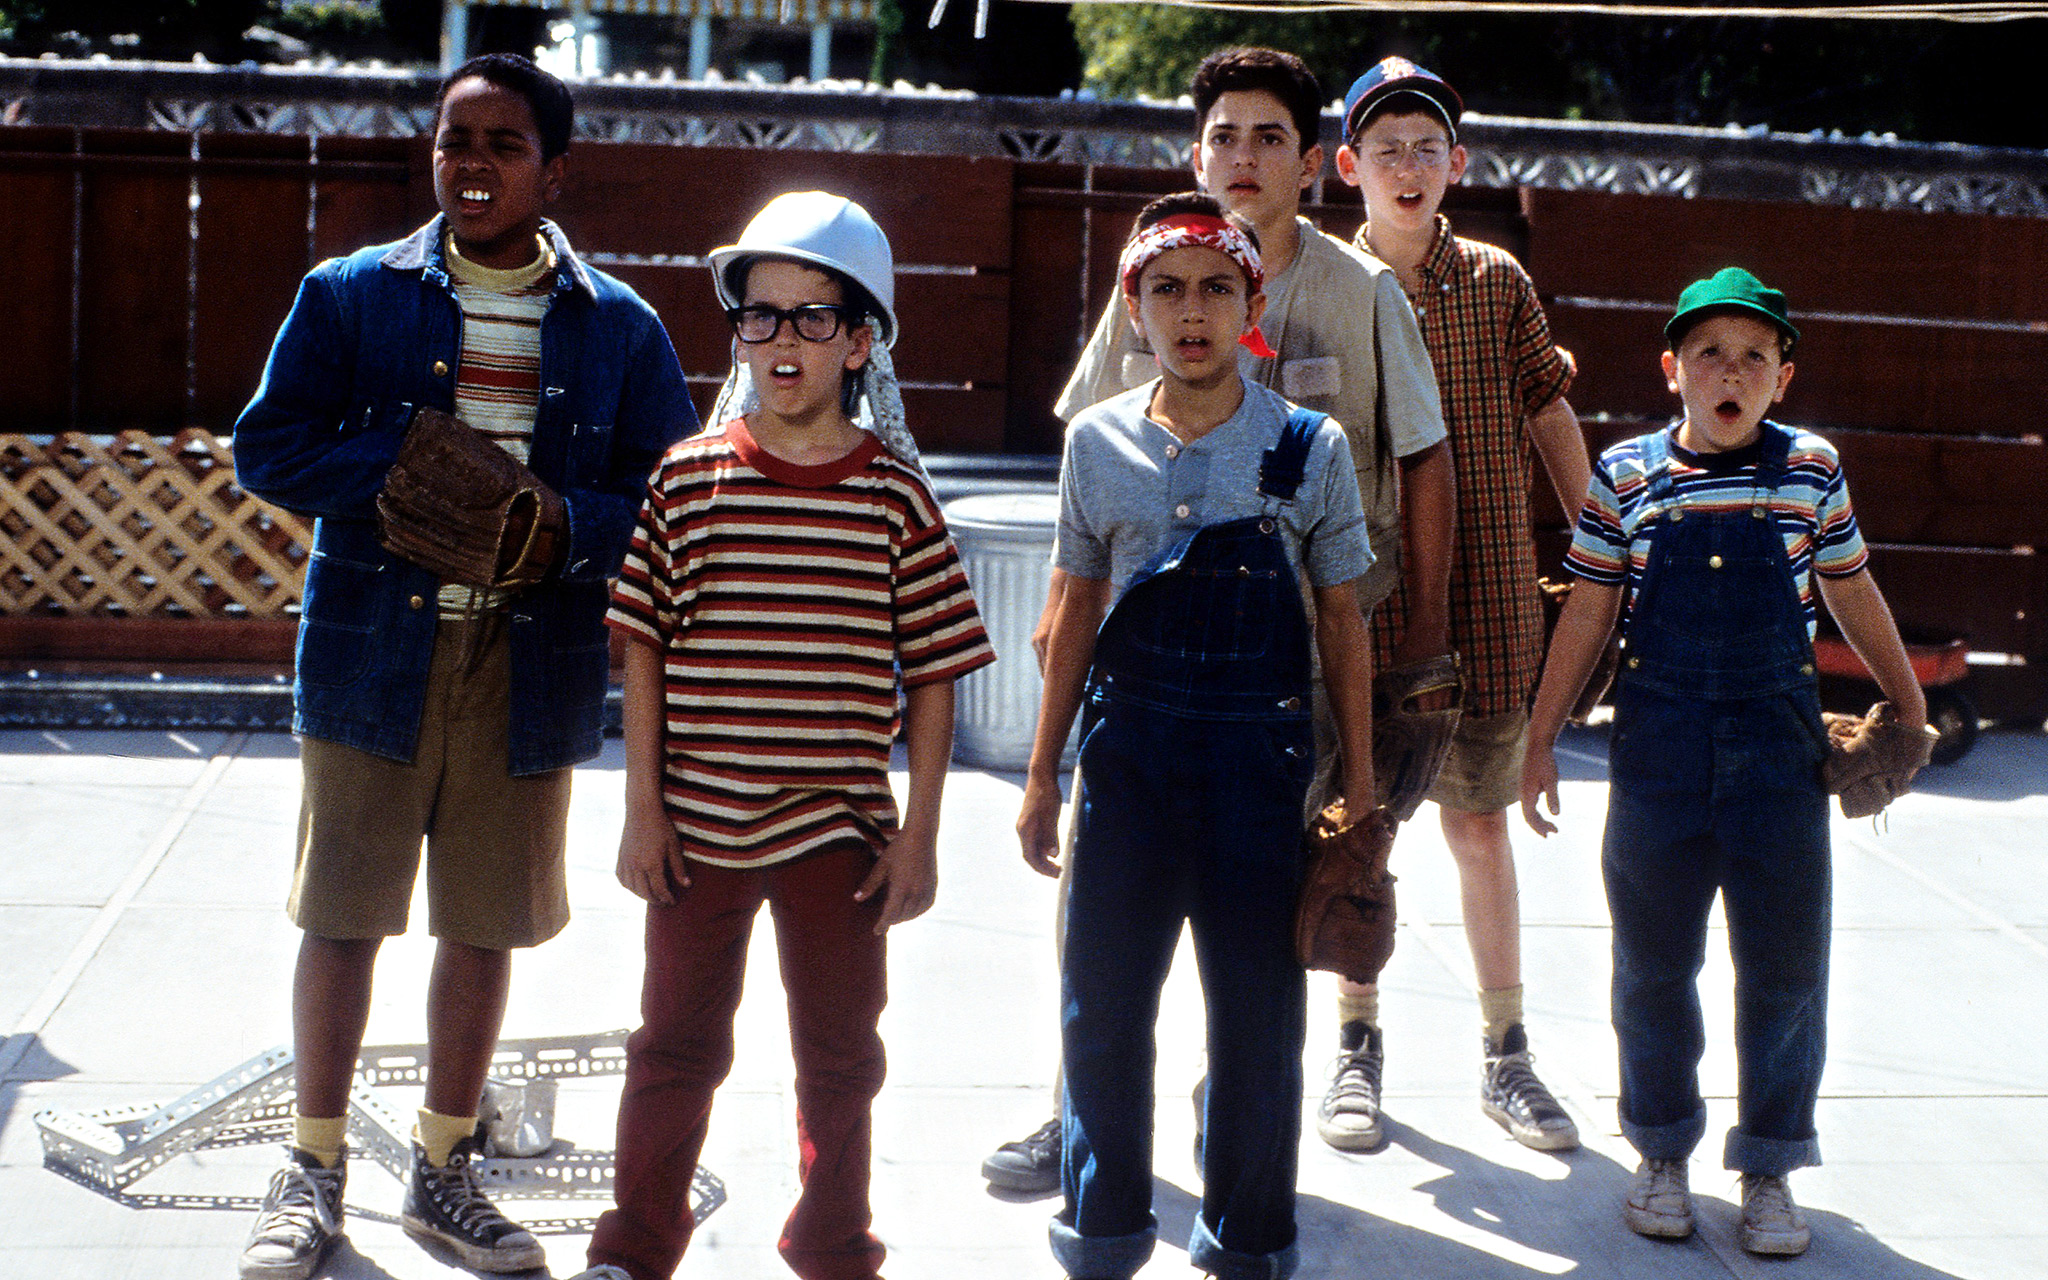 Cast Of The Sandlot Where Are They Now Gallery EBaums World.